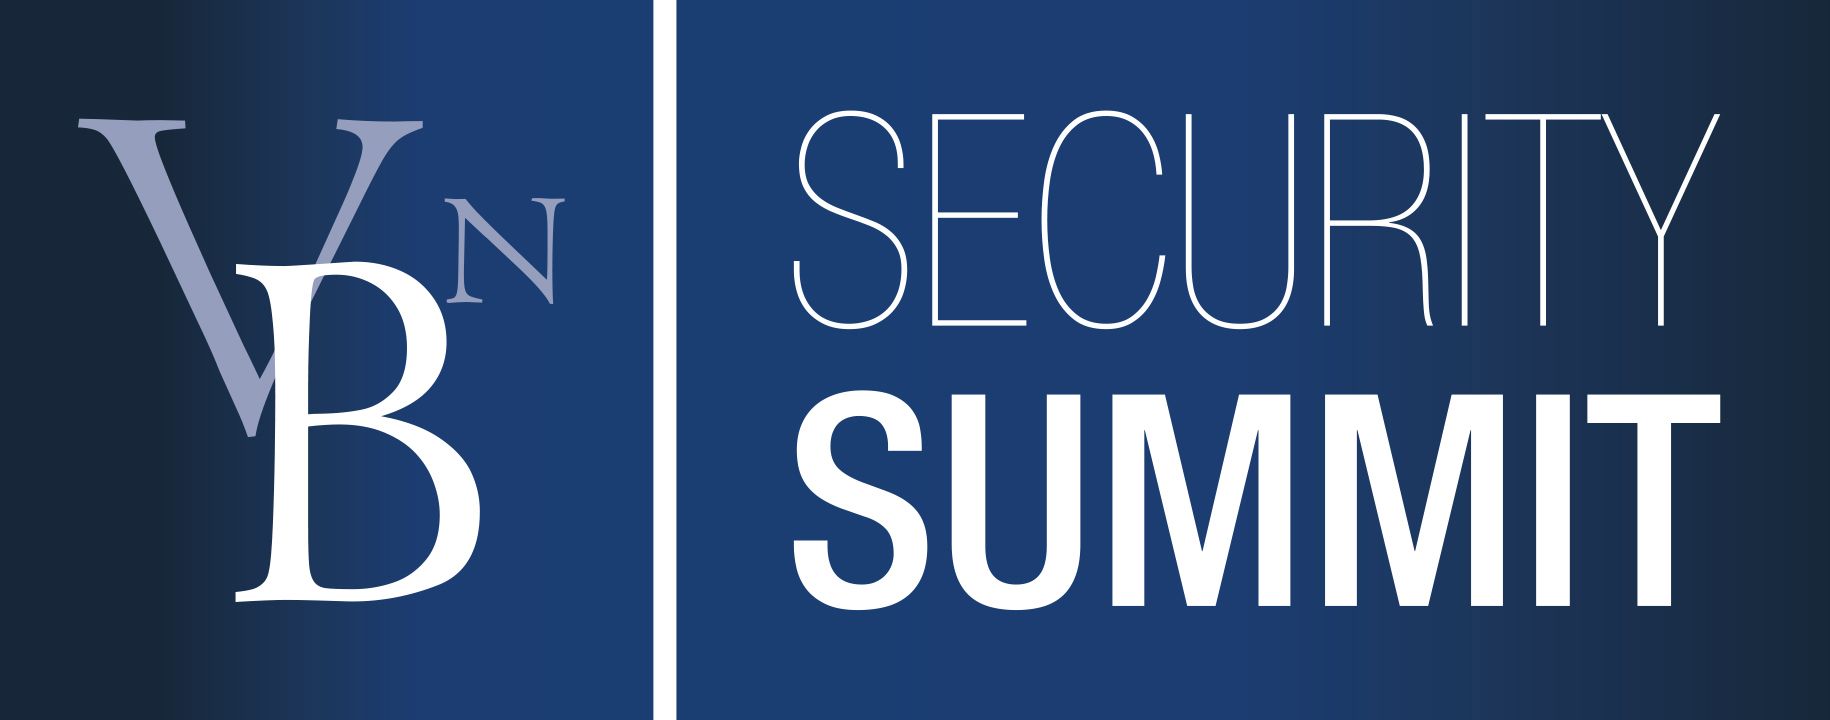 Bavak is present at the VBN Security Summit